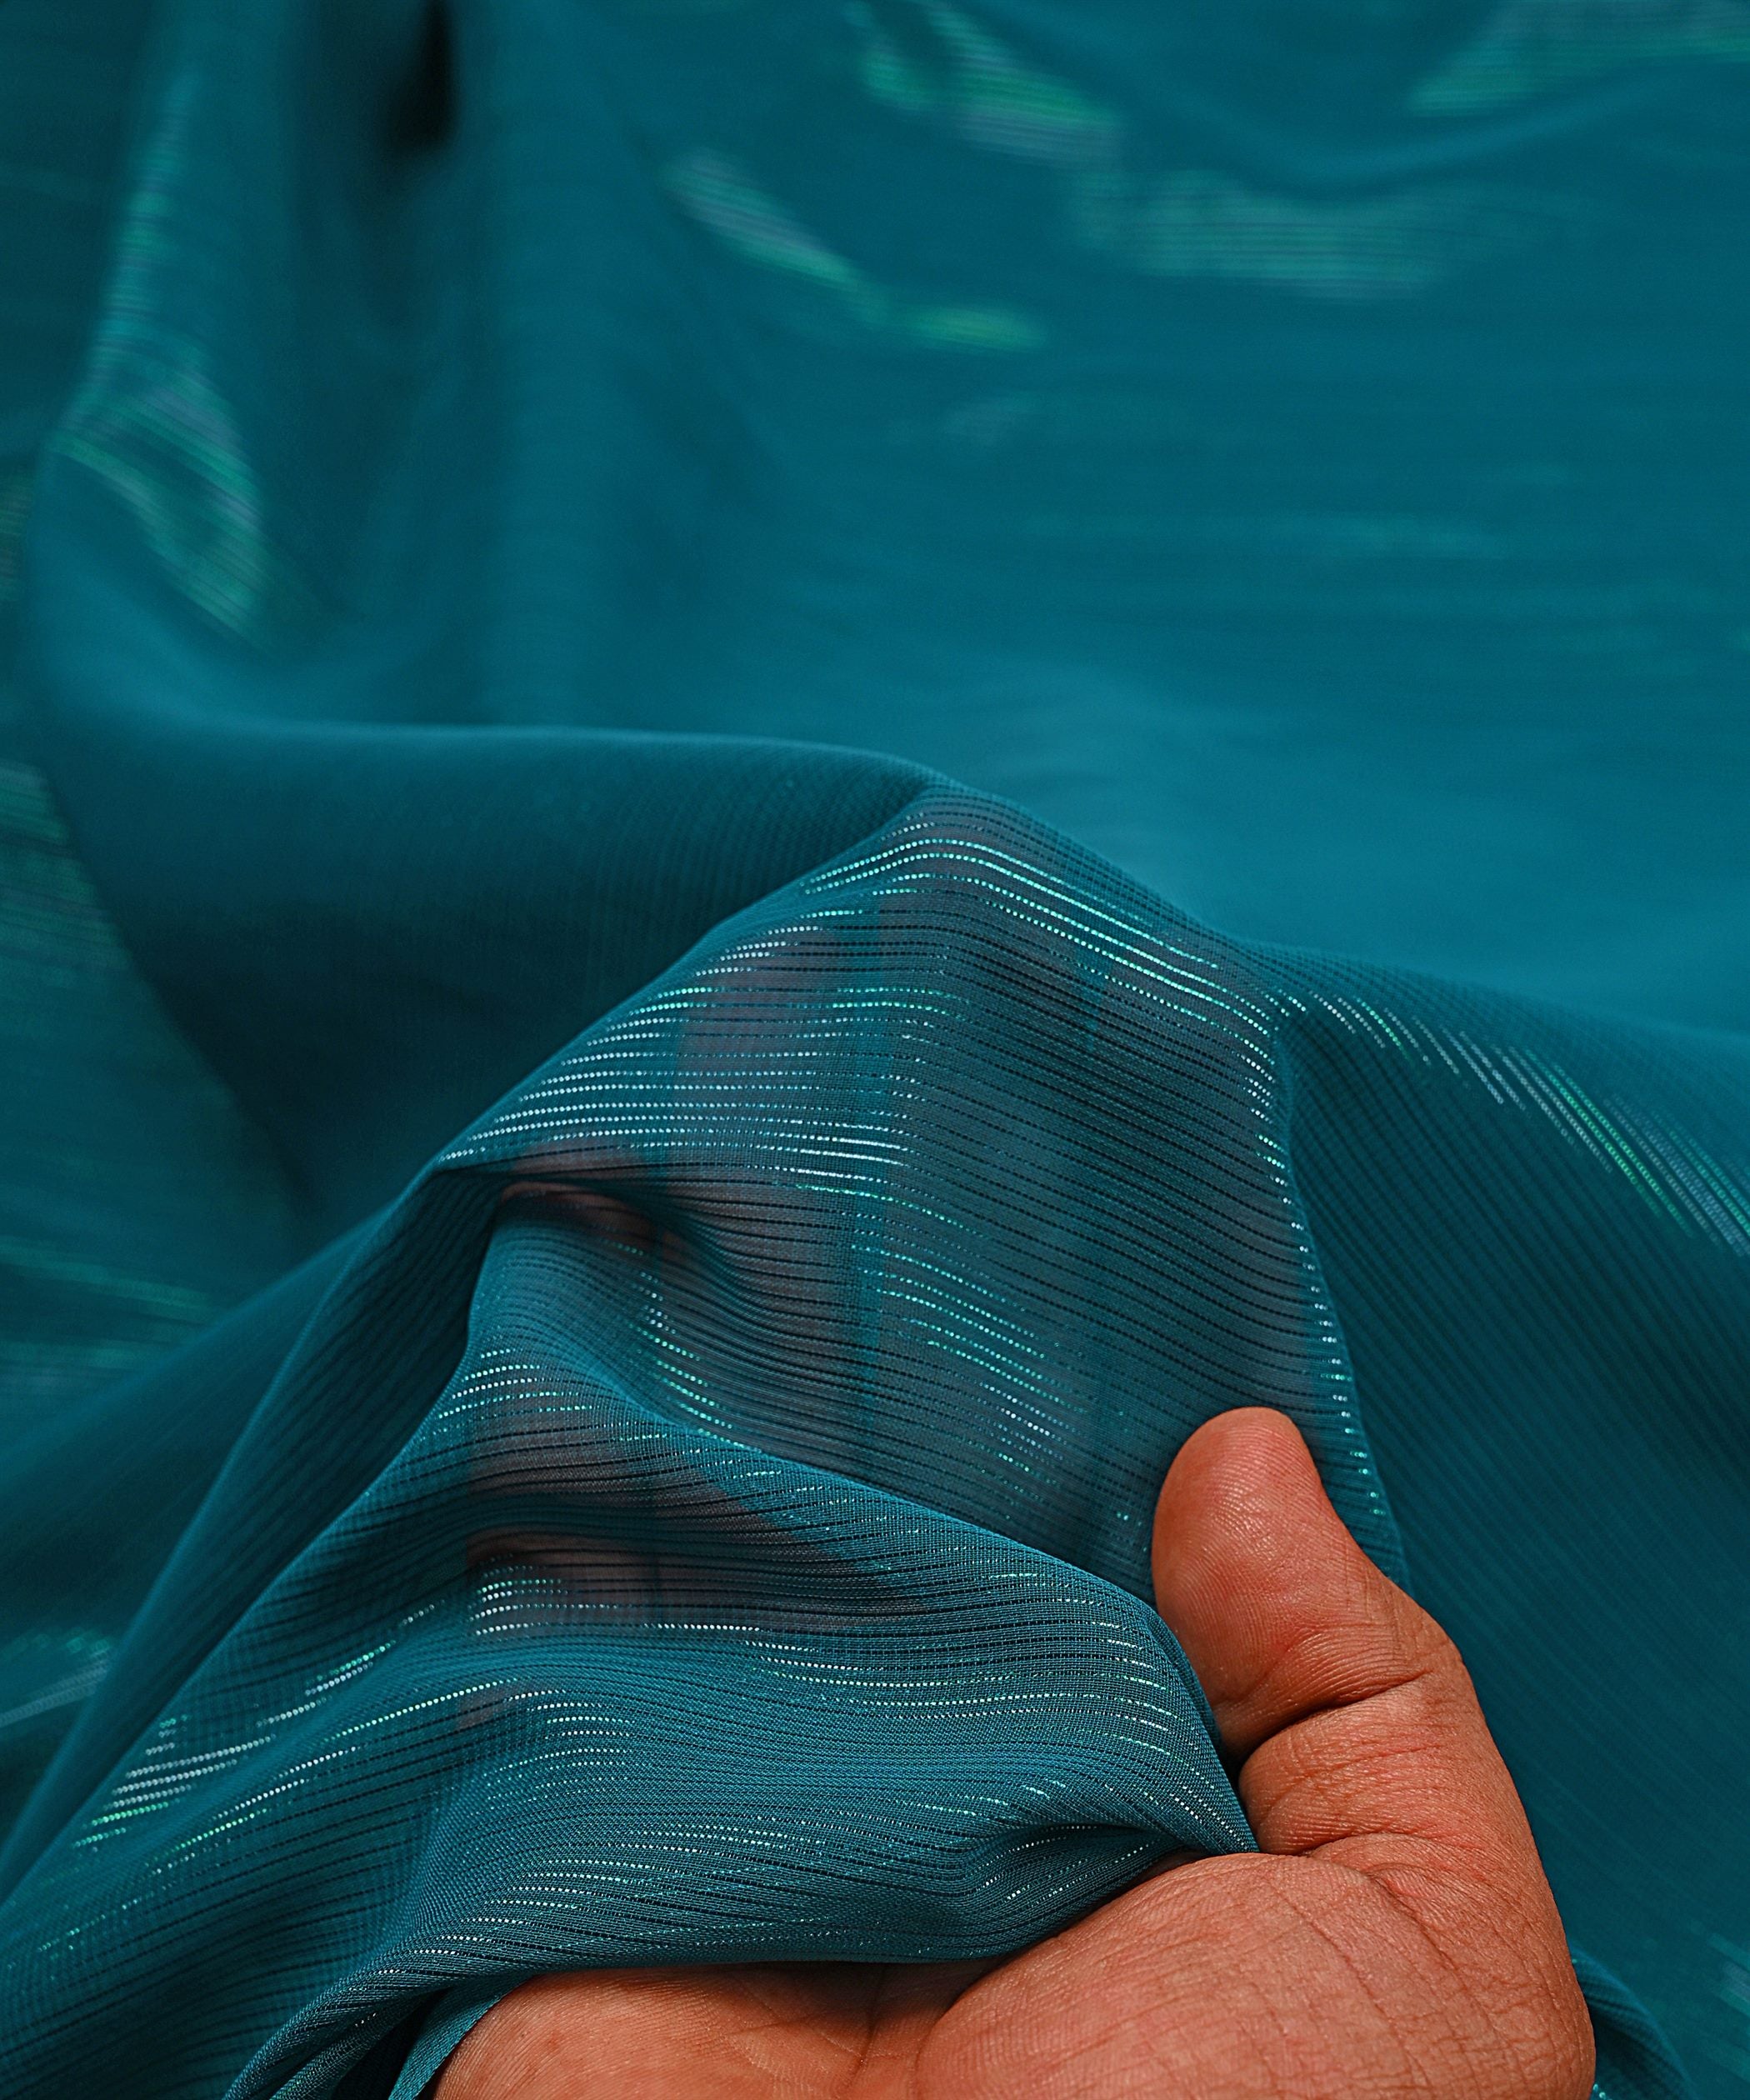 Dark Teal Georgette Fabric with Stripes